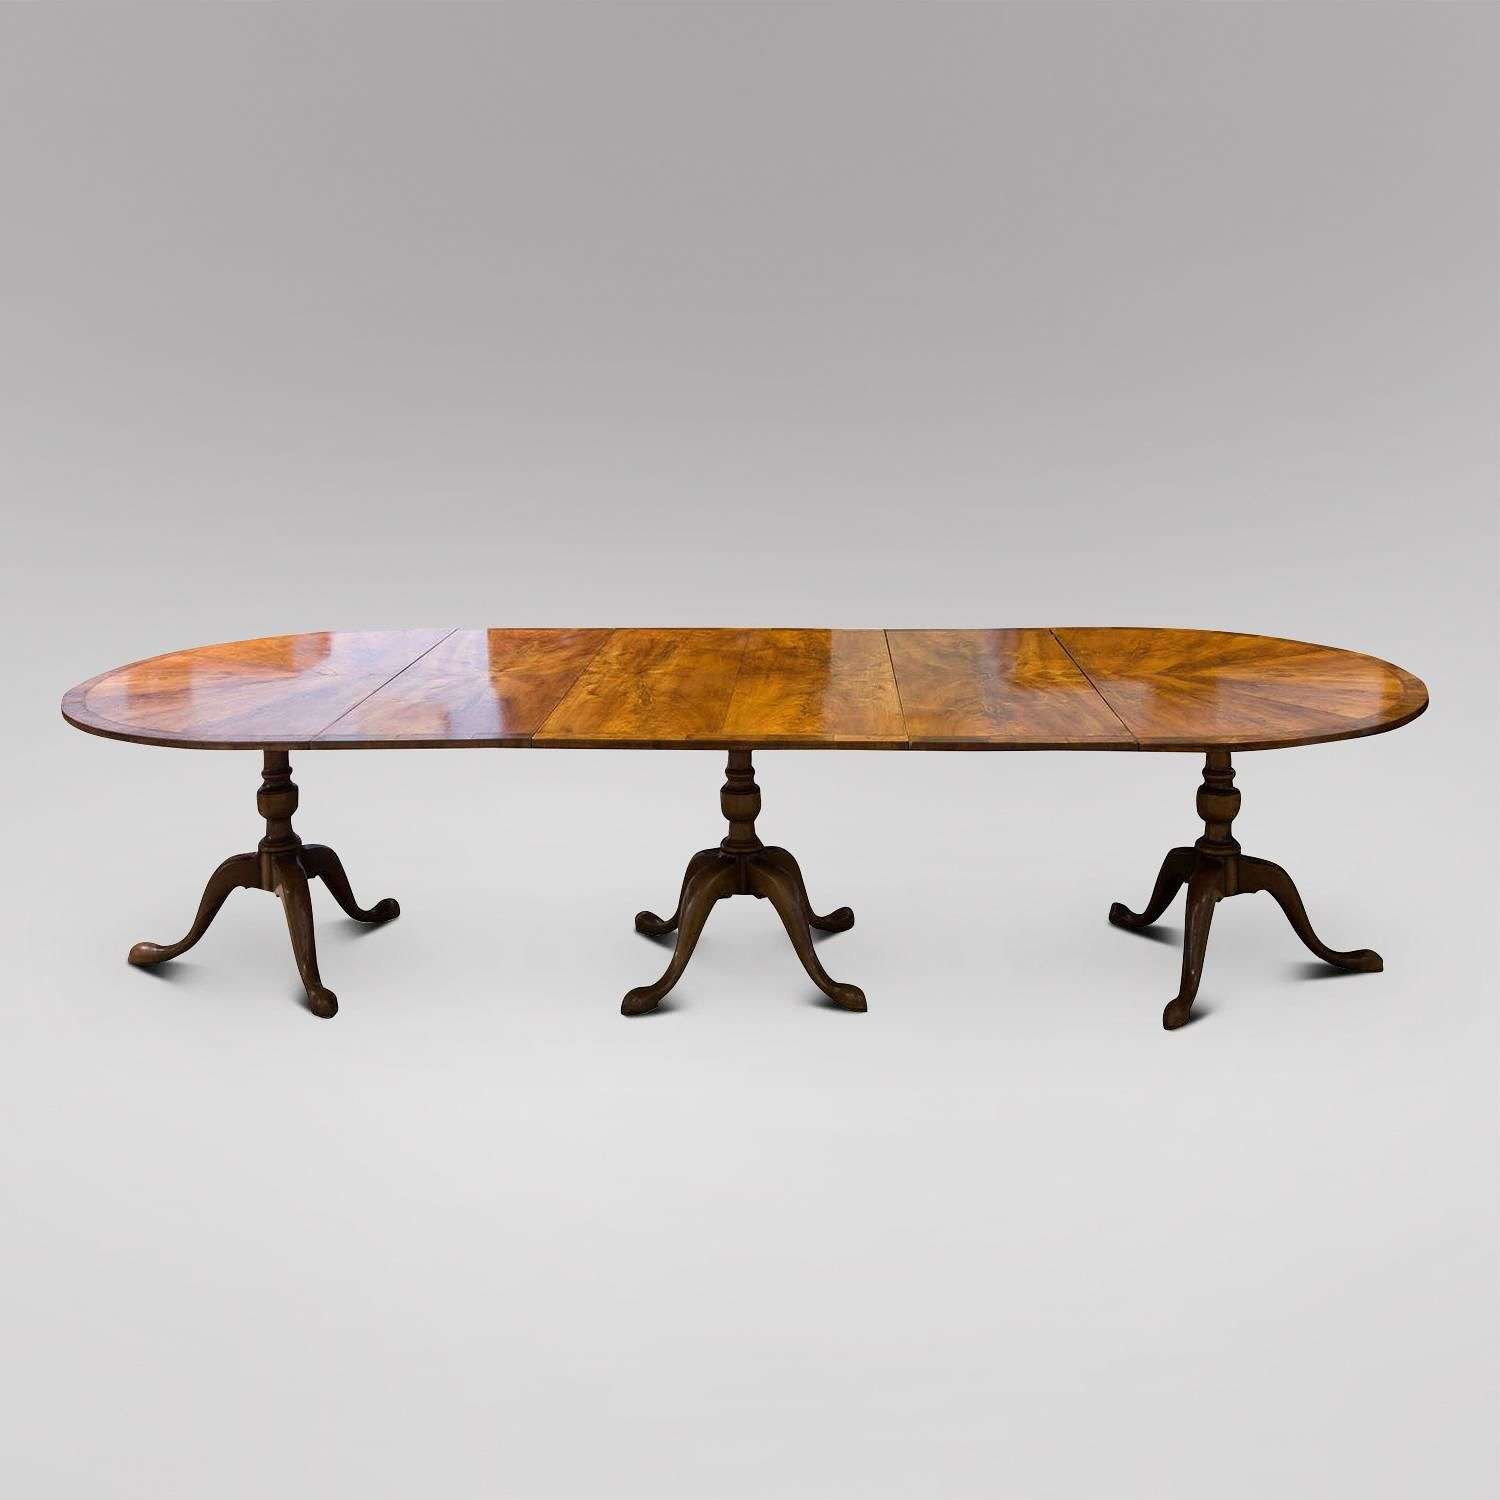 Walnut Dining Table with two leaves and three pedestals c.1900